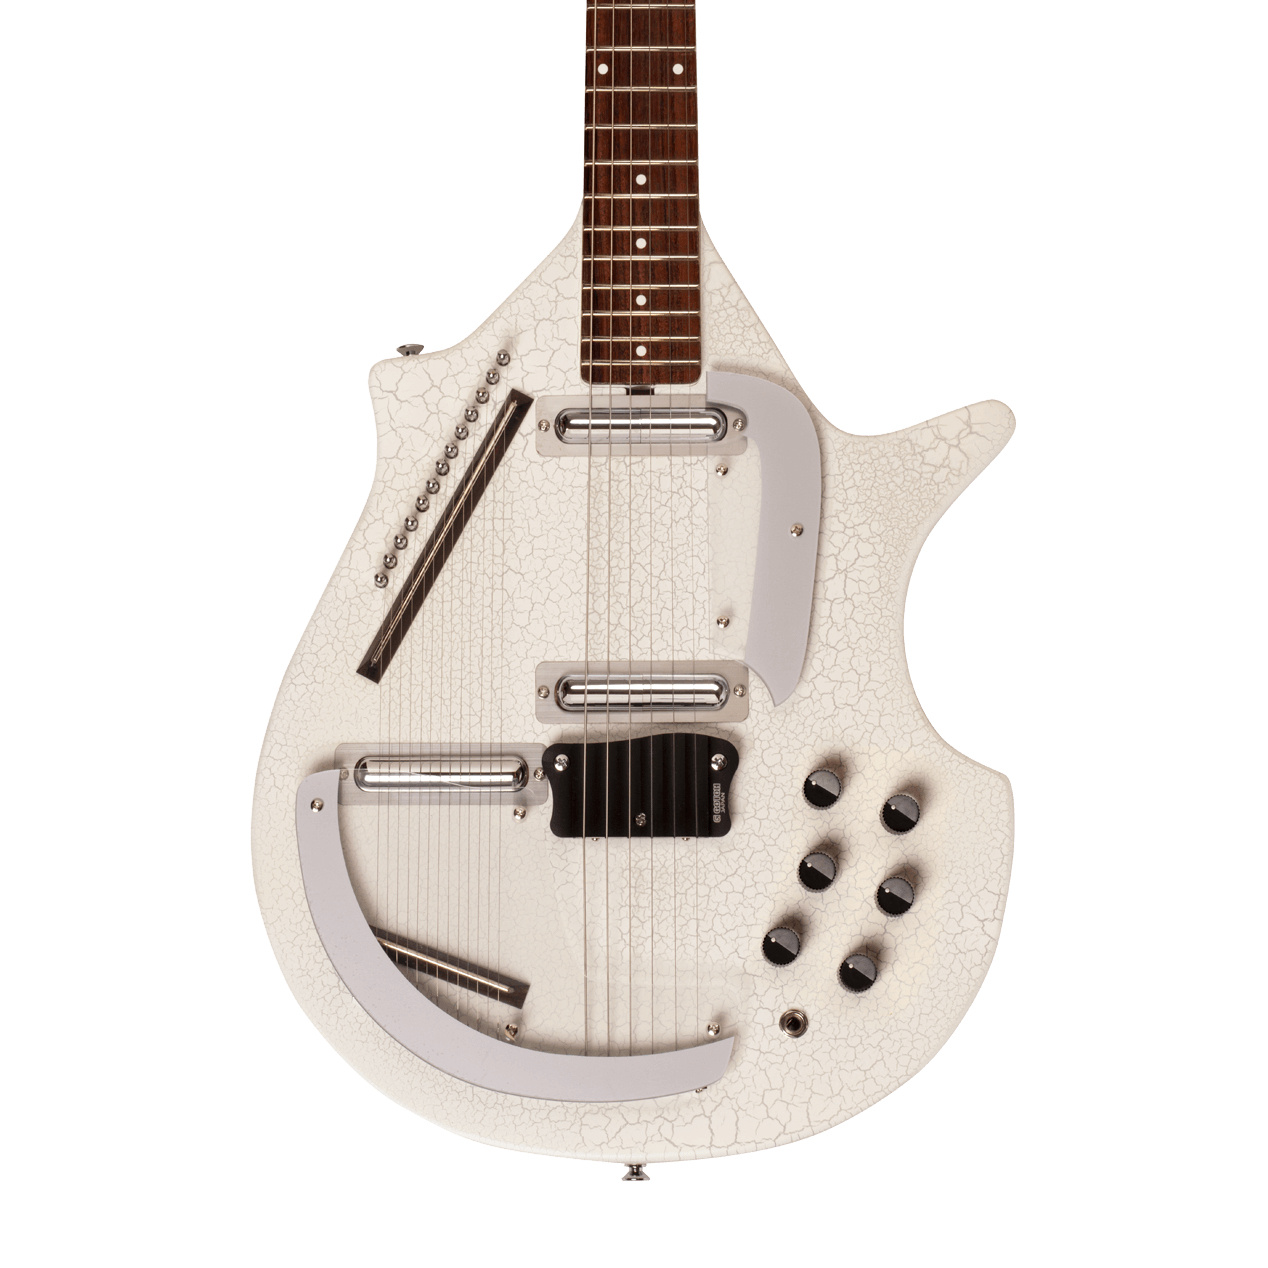 Danelectro Coral Electric Sitar - White Crackle - Reissue of the Famous Big Sitar of the 1960s